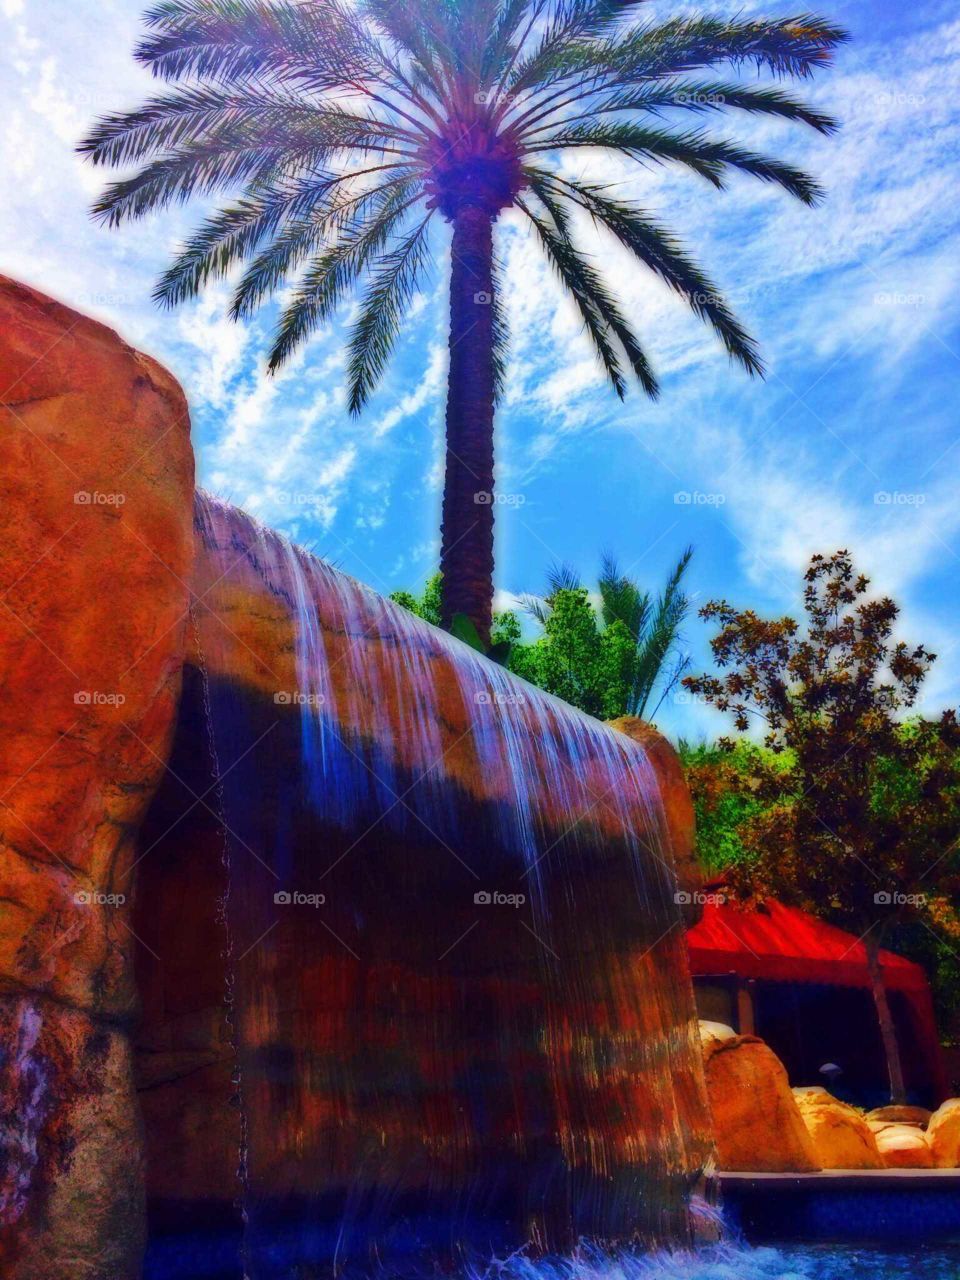 Relaxing at Harrahs Sothern California. waterfall jacuzzi time. Palm trees.